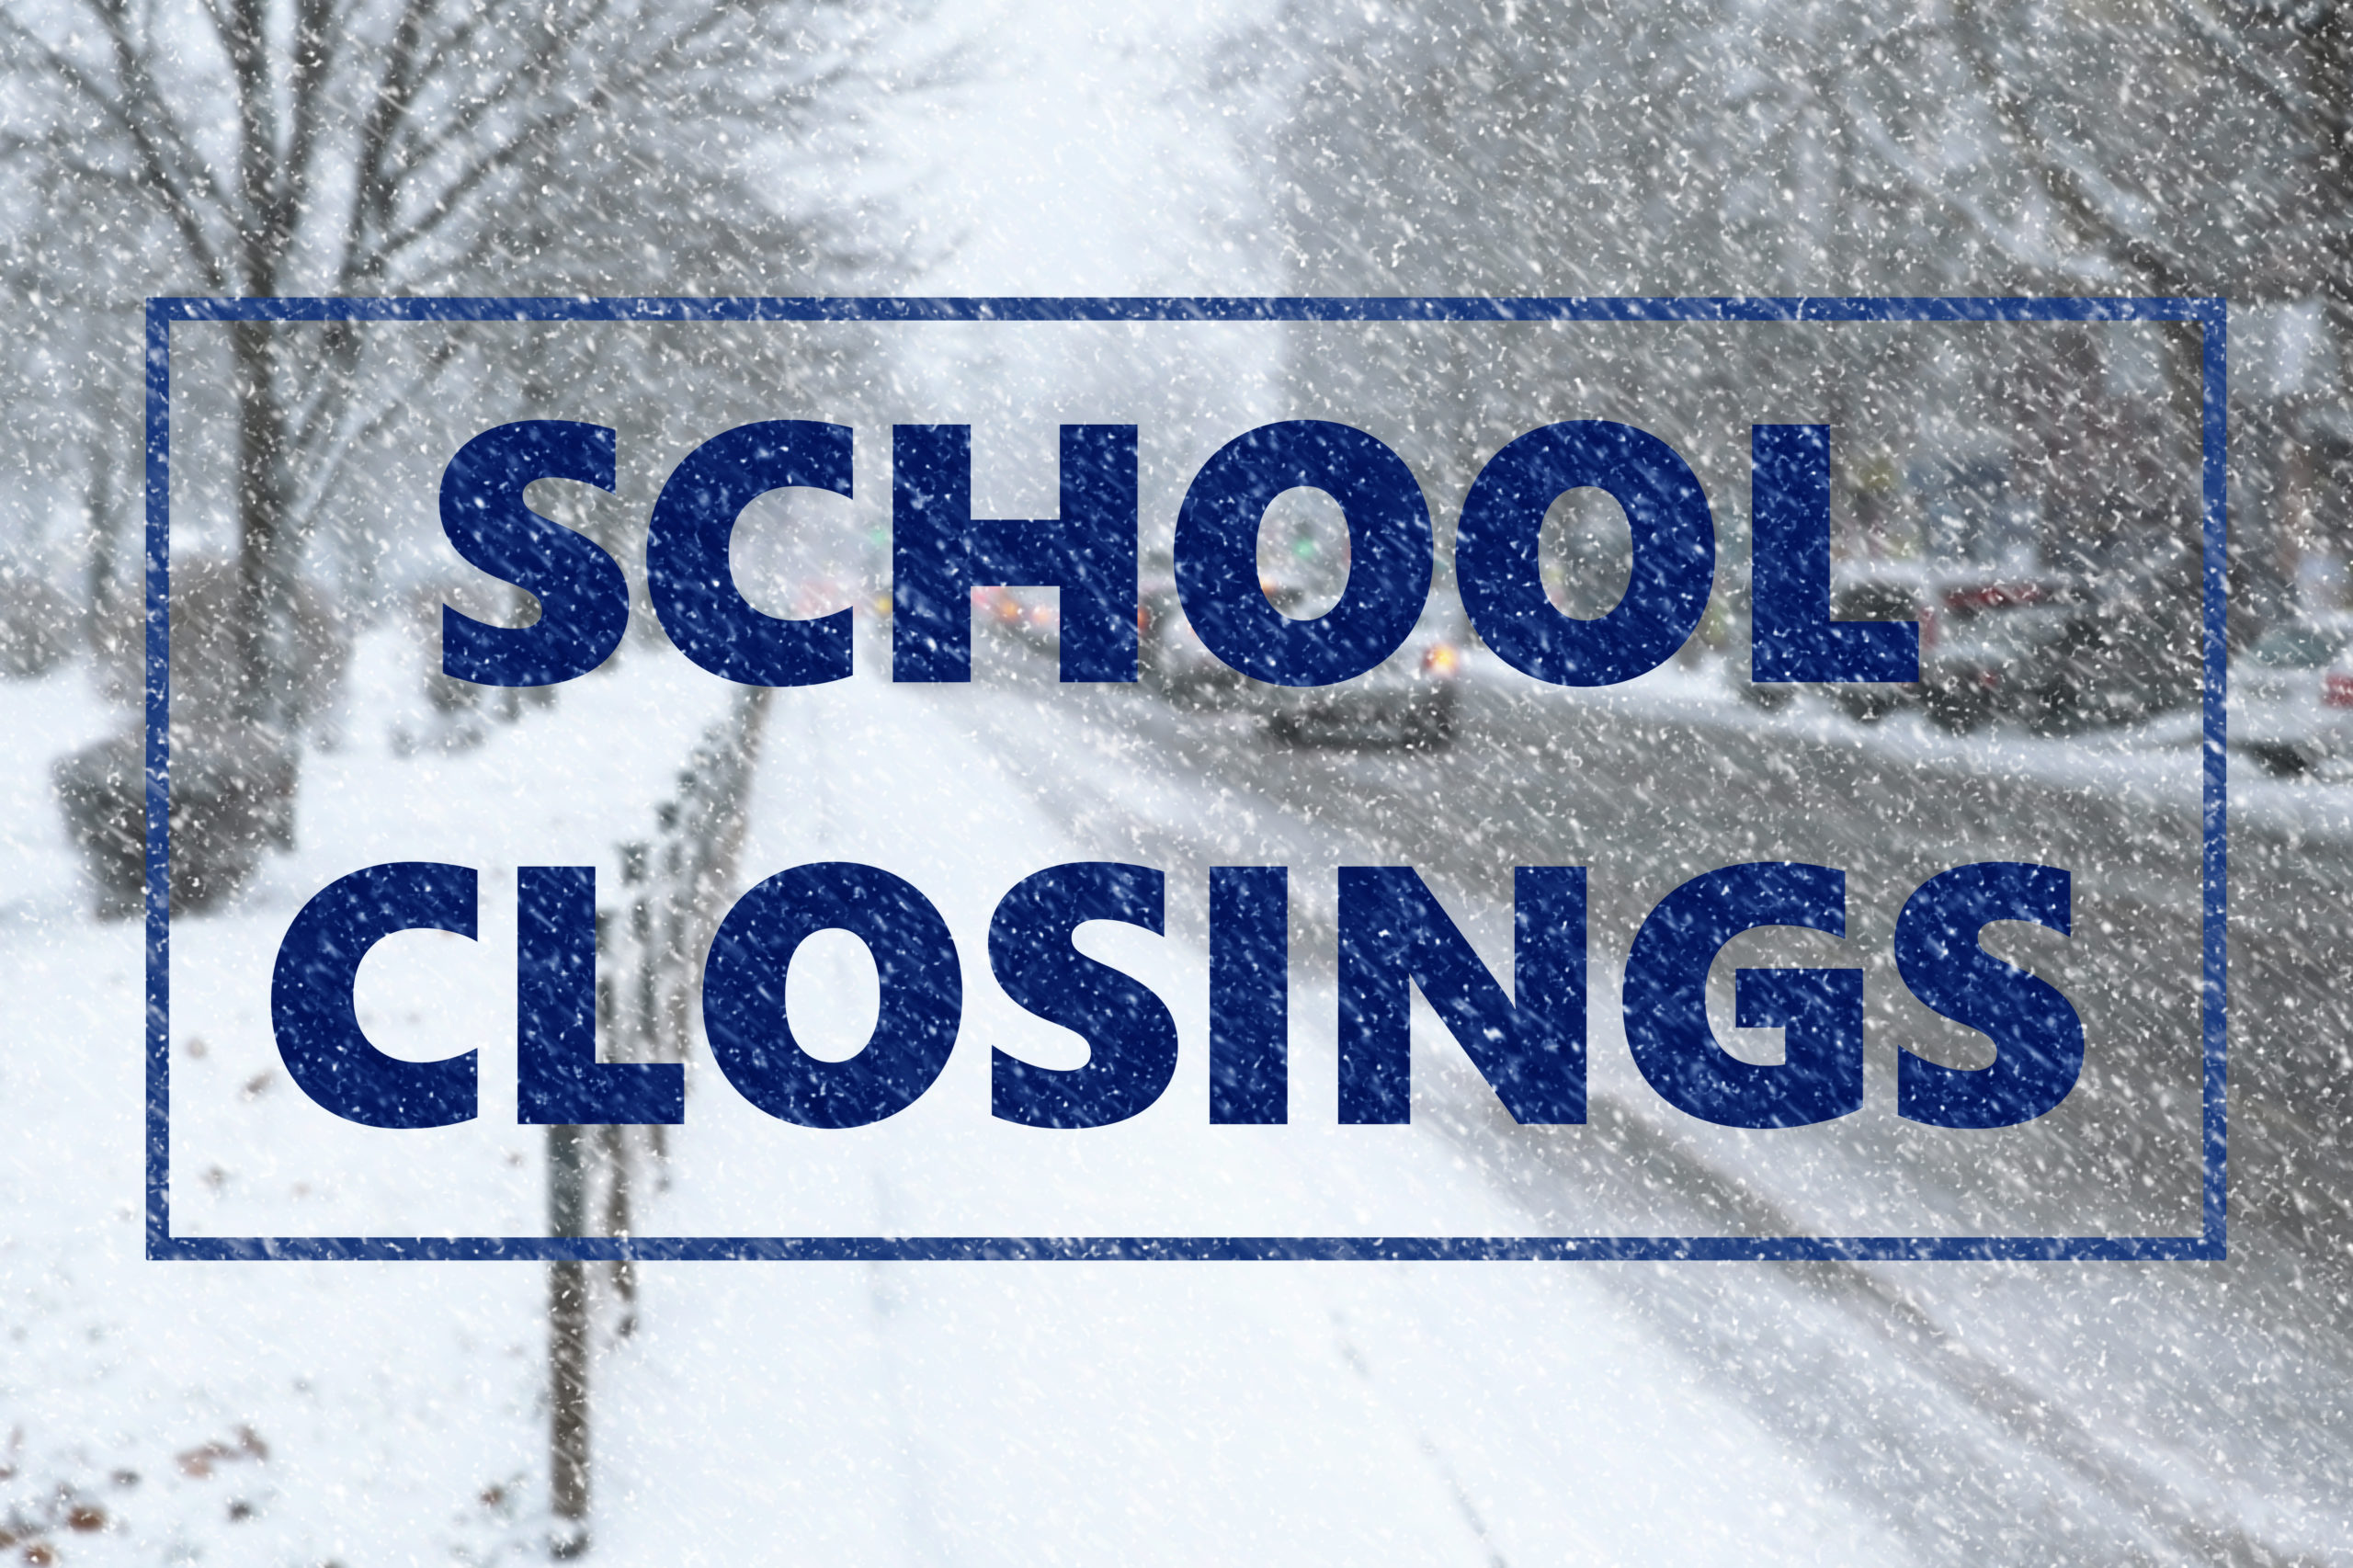 Randolph County schools closed due to weather